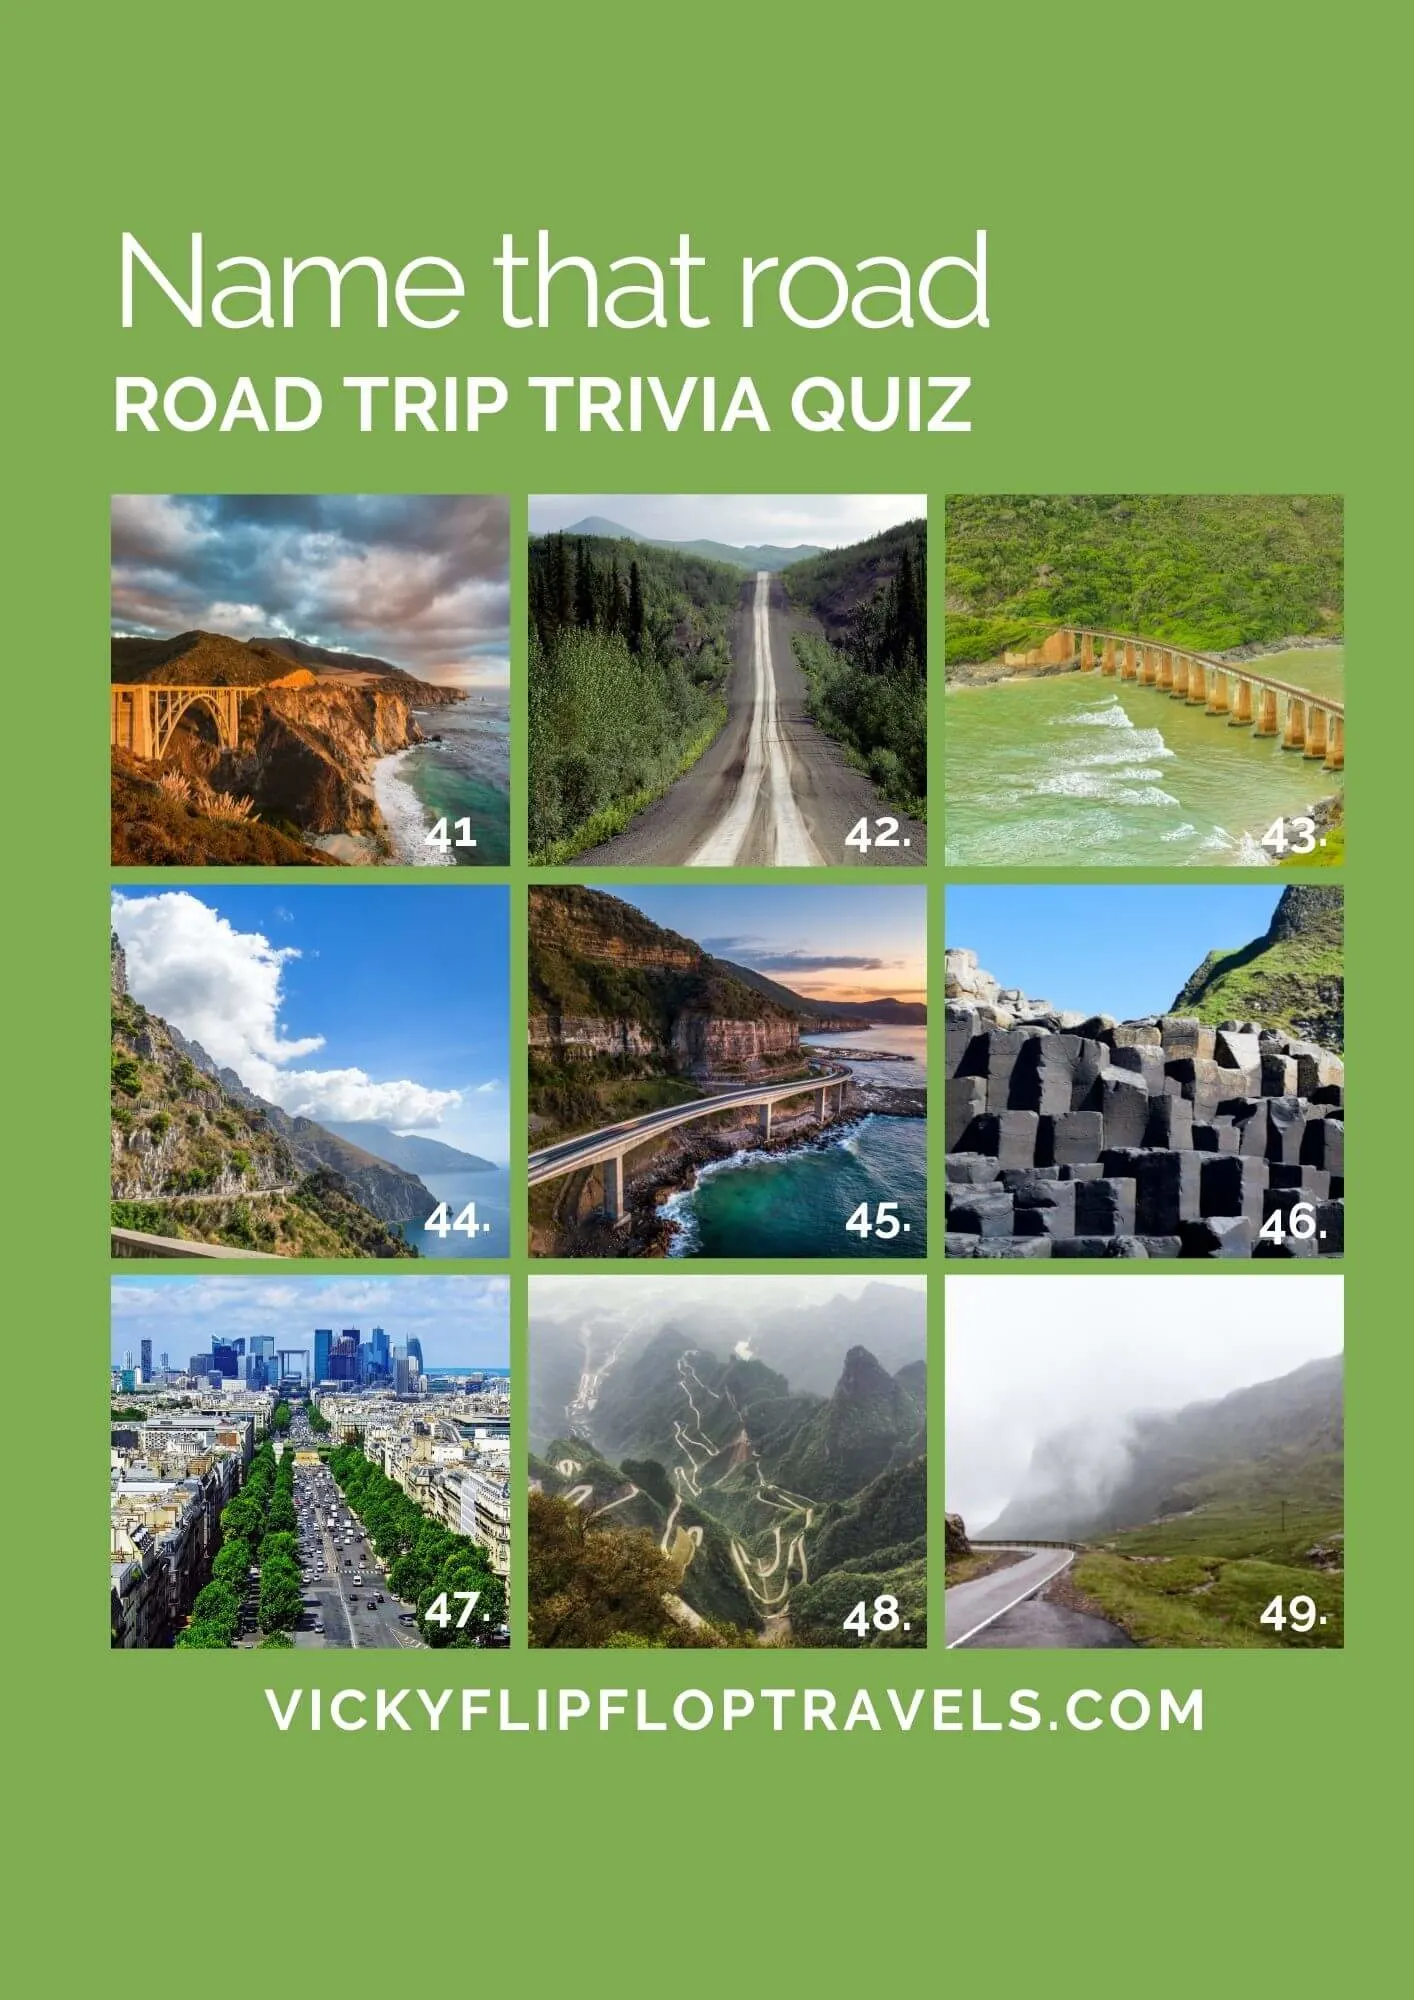 Quizz for road trip